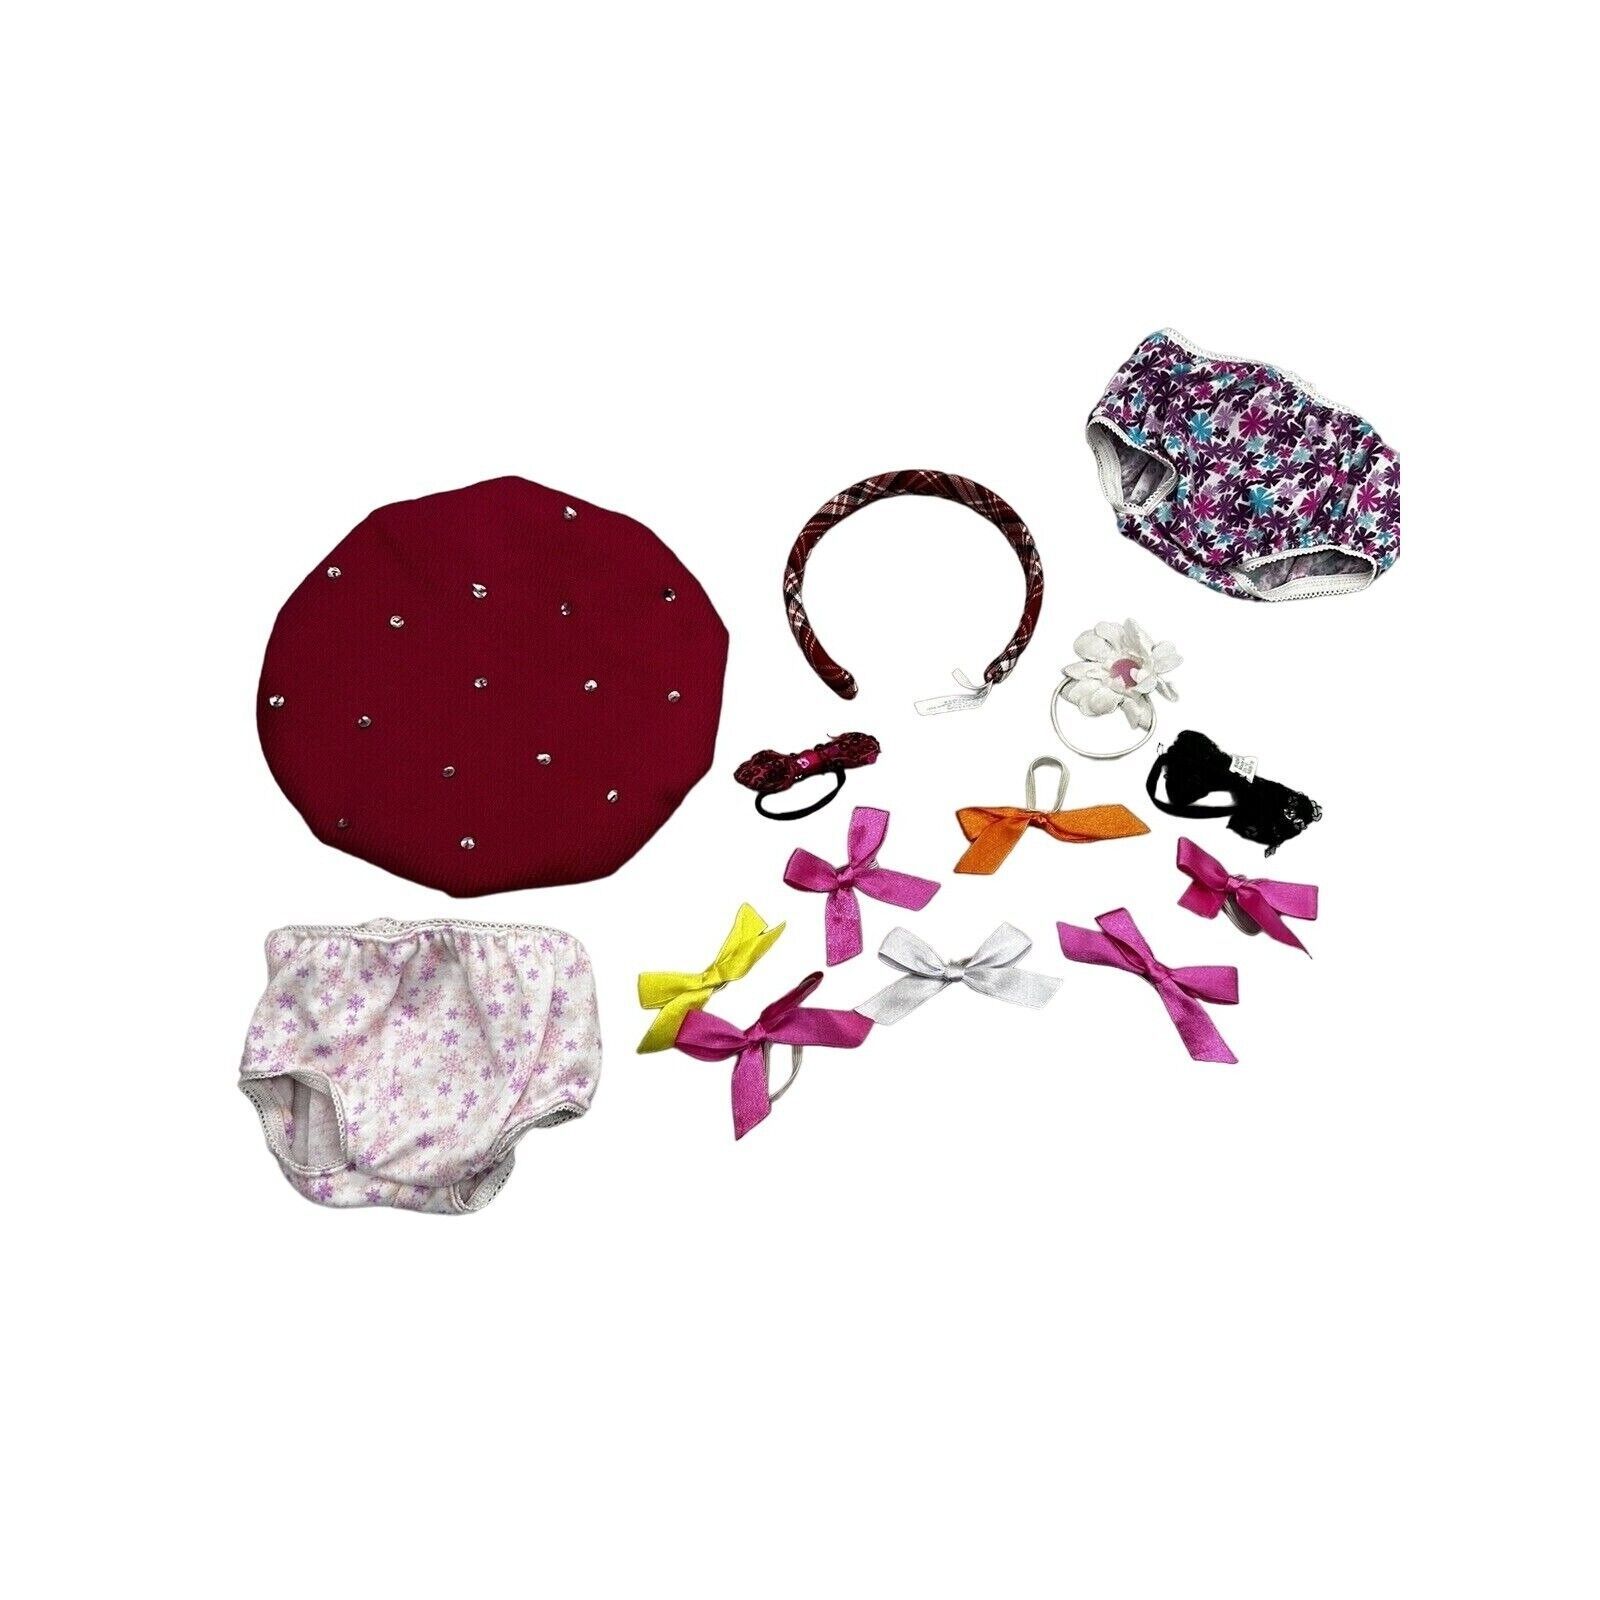 Build A Bear Accessories Lot of Bows, Headband, Hat & Underware for BAB Plush - $12.19